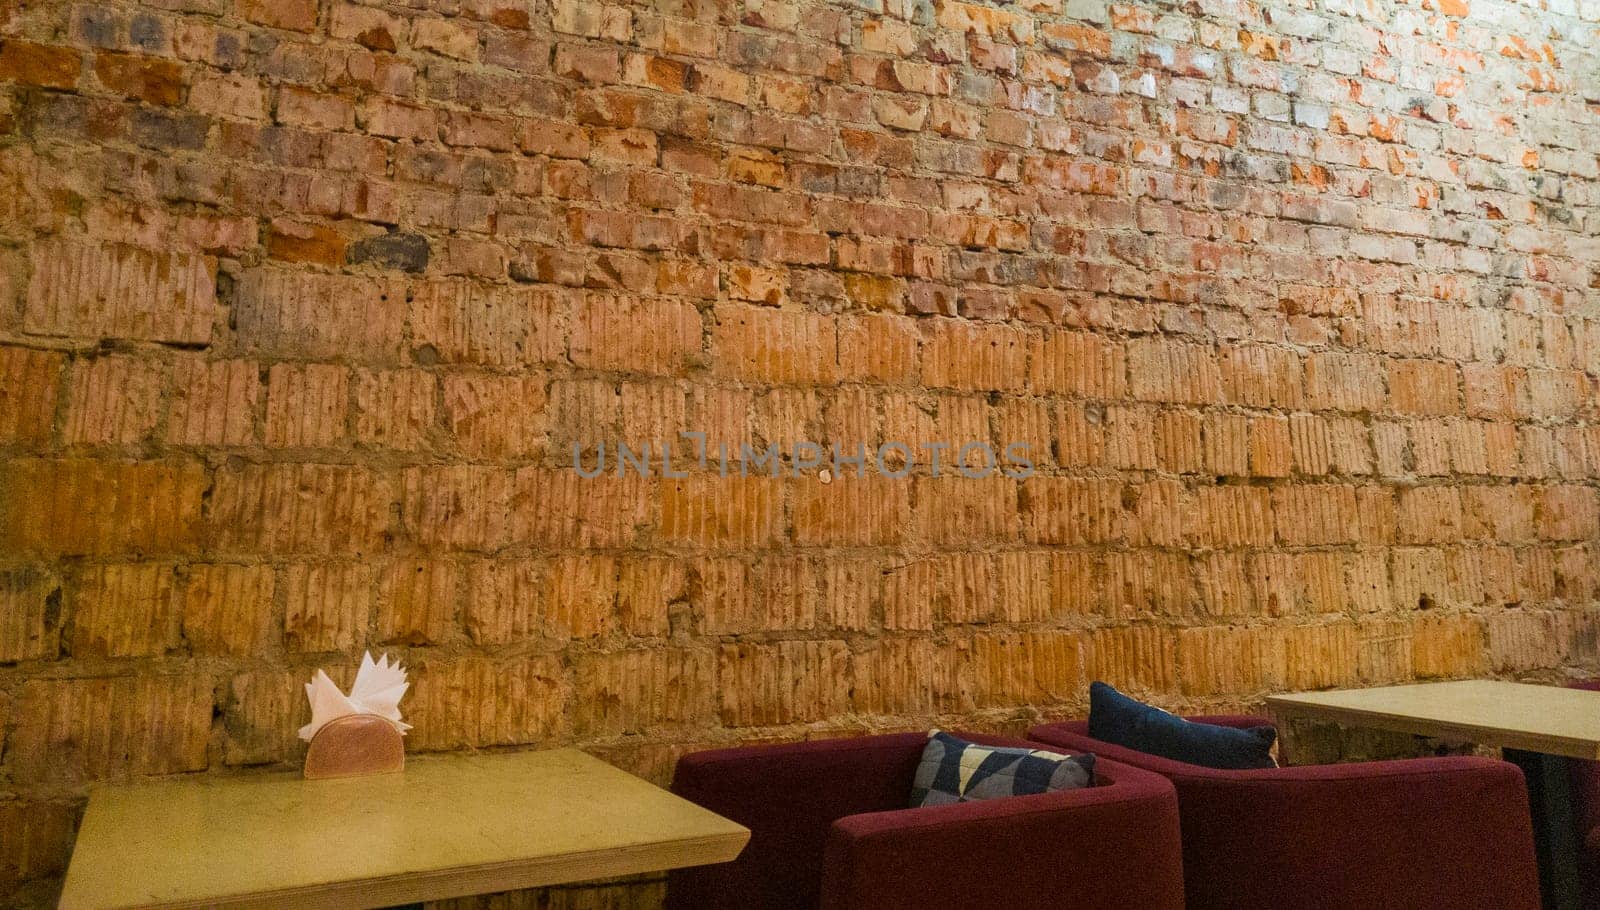 Concept shot of the brick wall as a part of interior design of the cafe